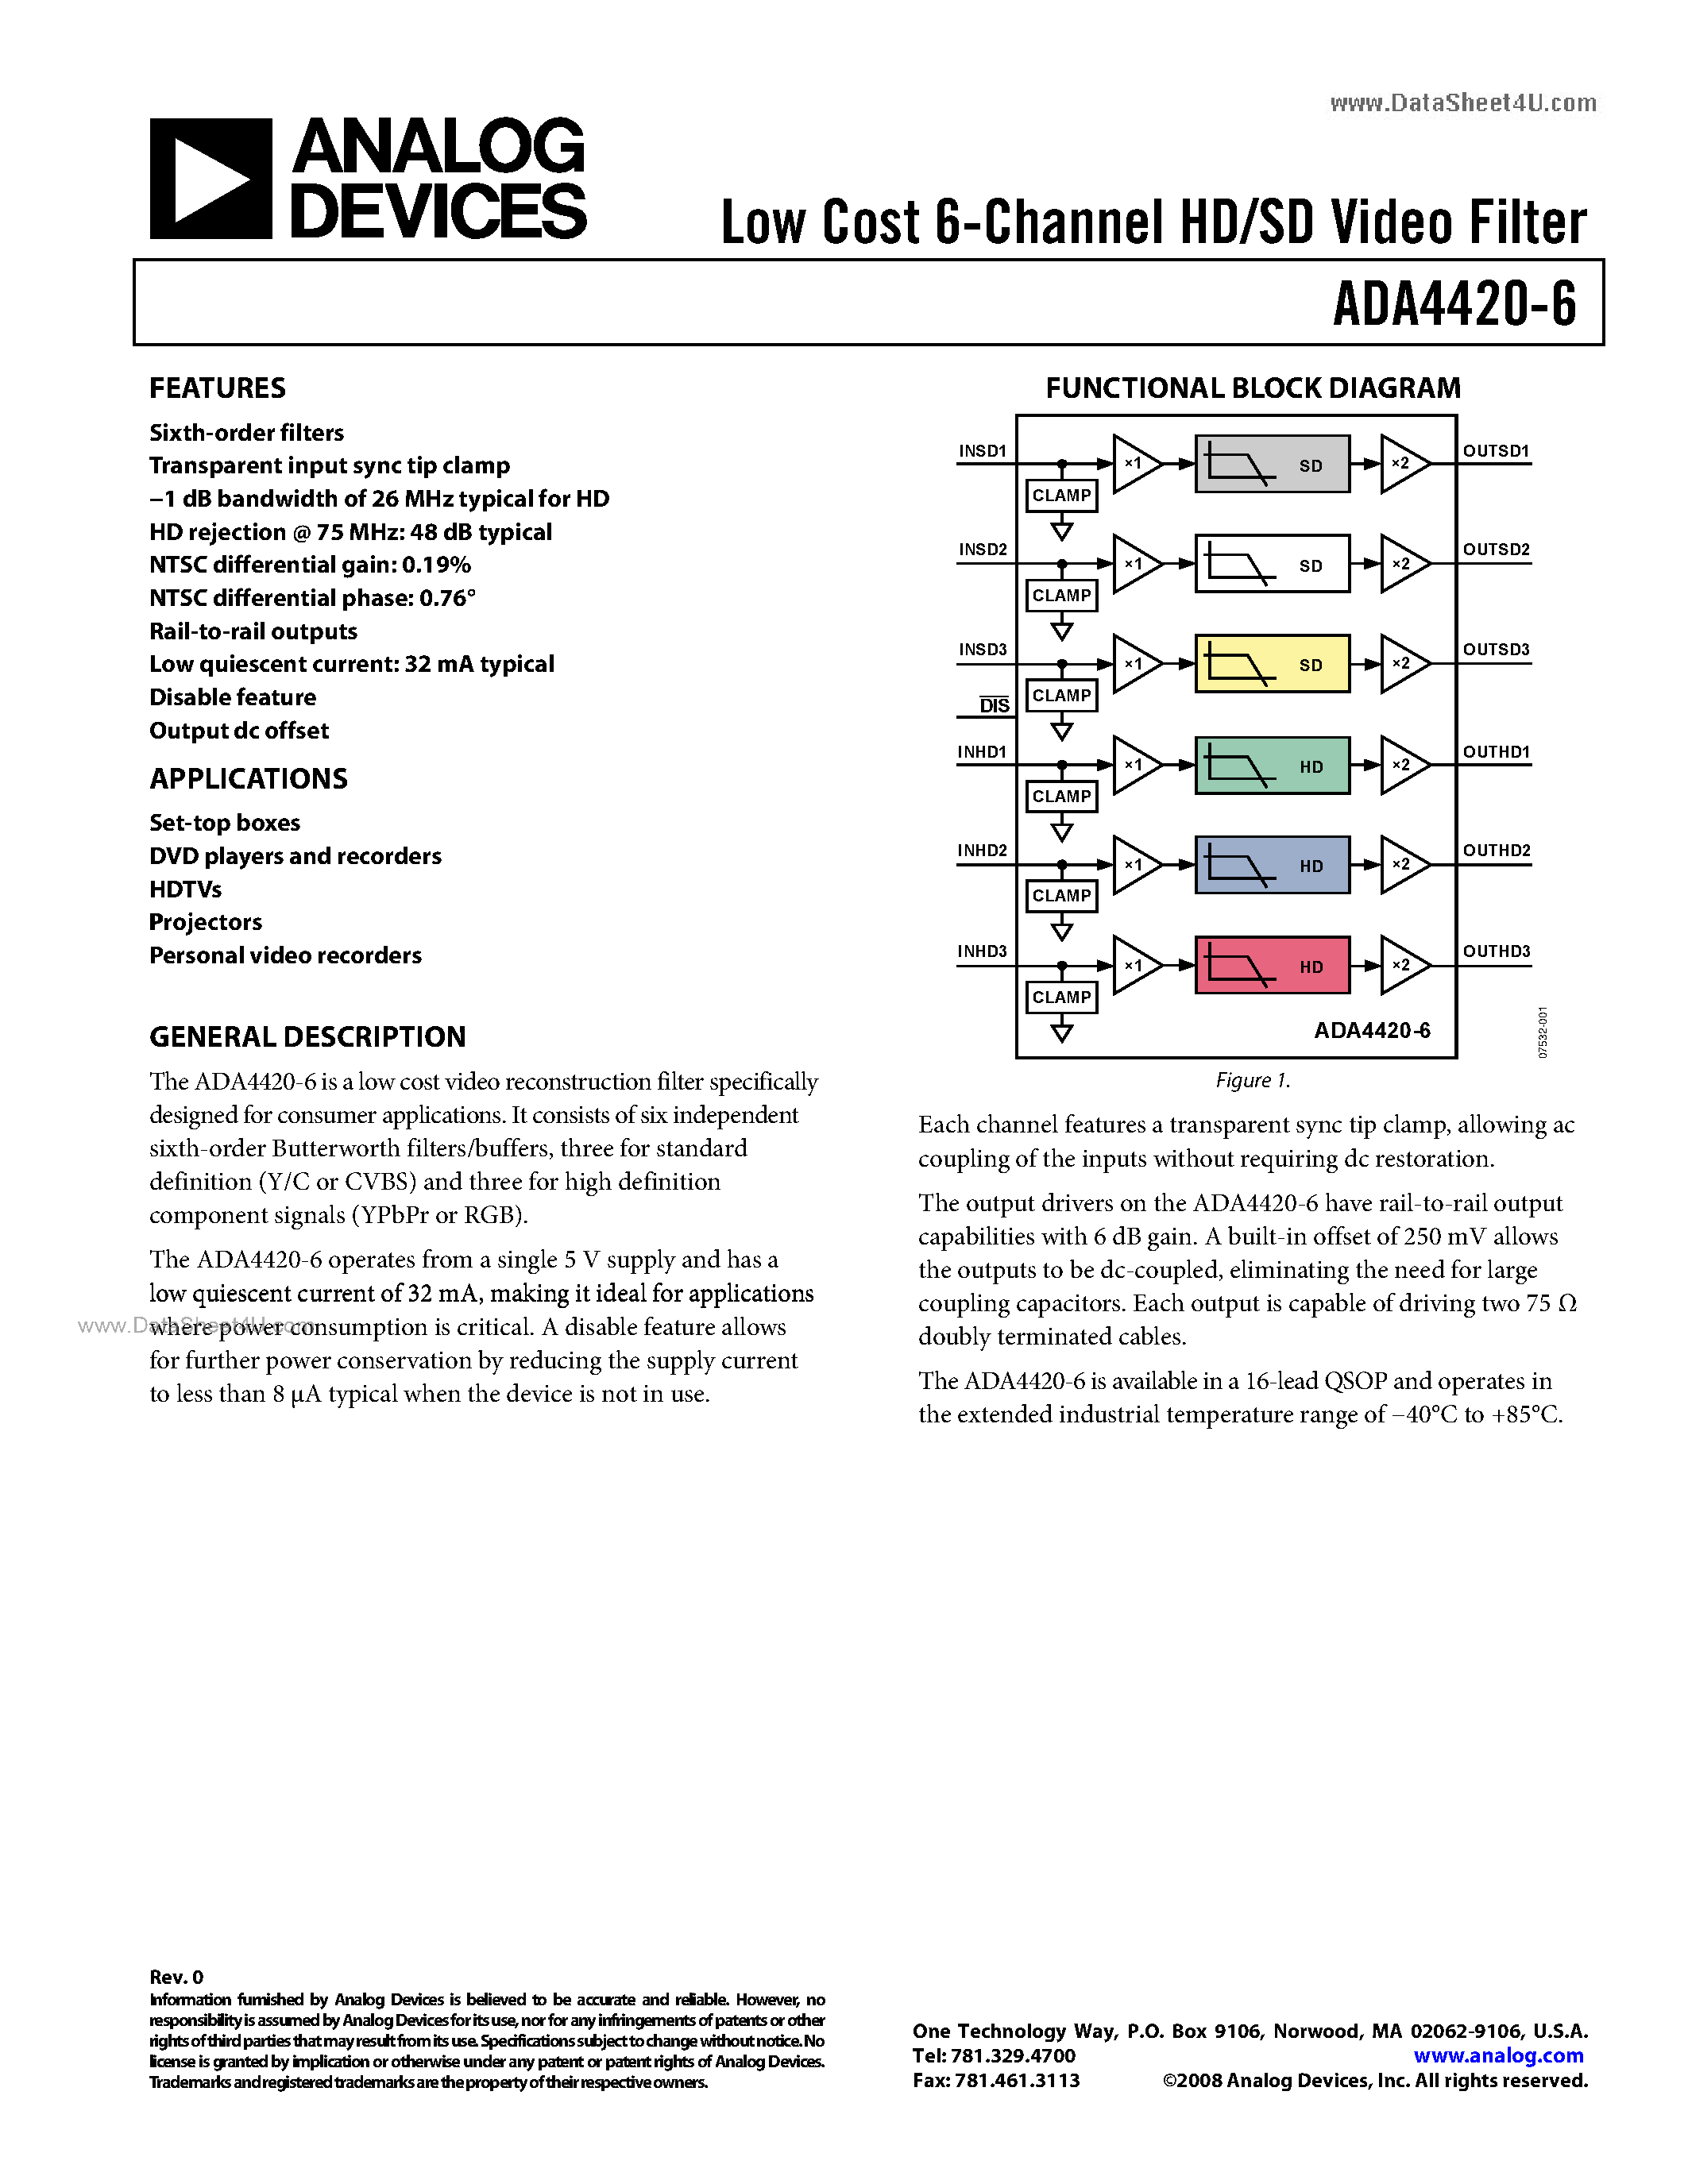 Datasheet ADA4420-6 - Low Cost 6-Channel HD/SD Video Filter page 1